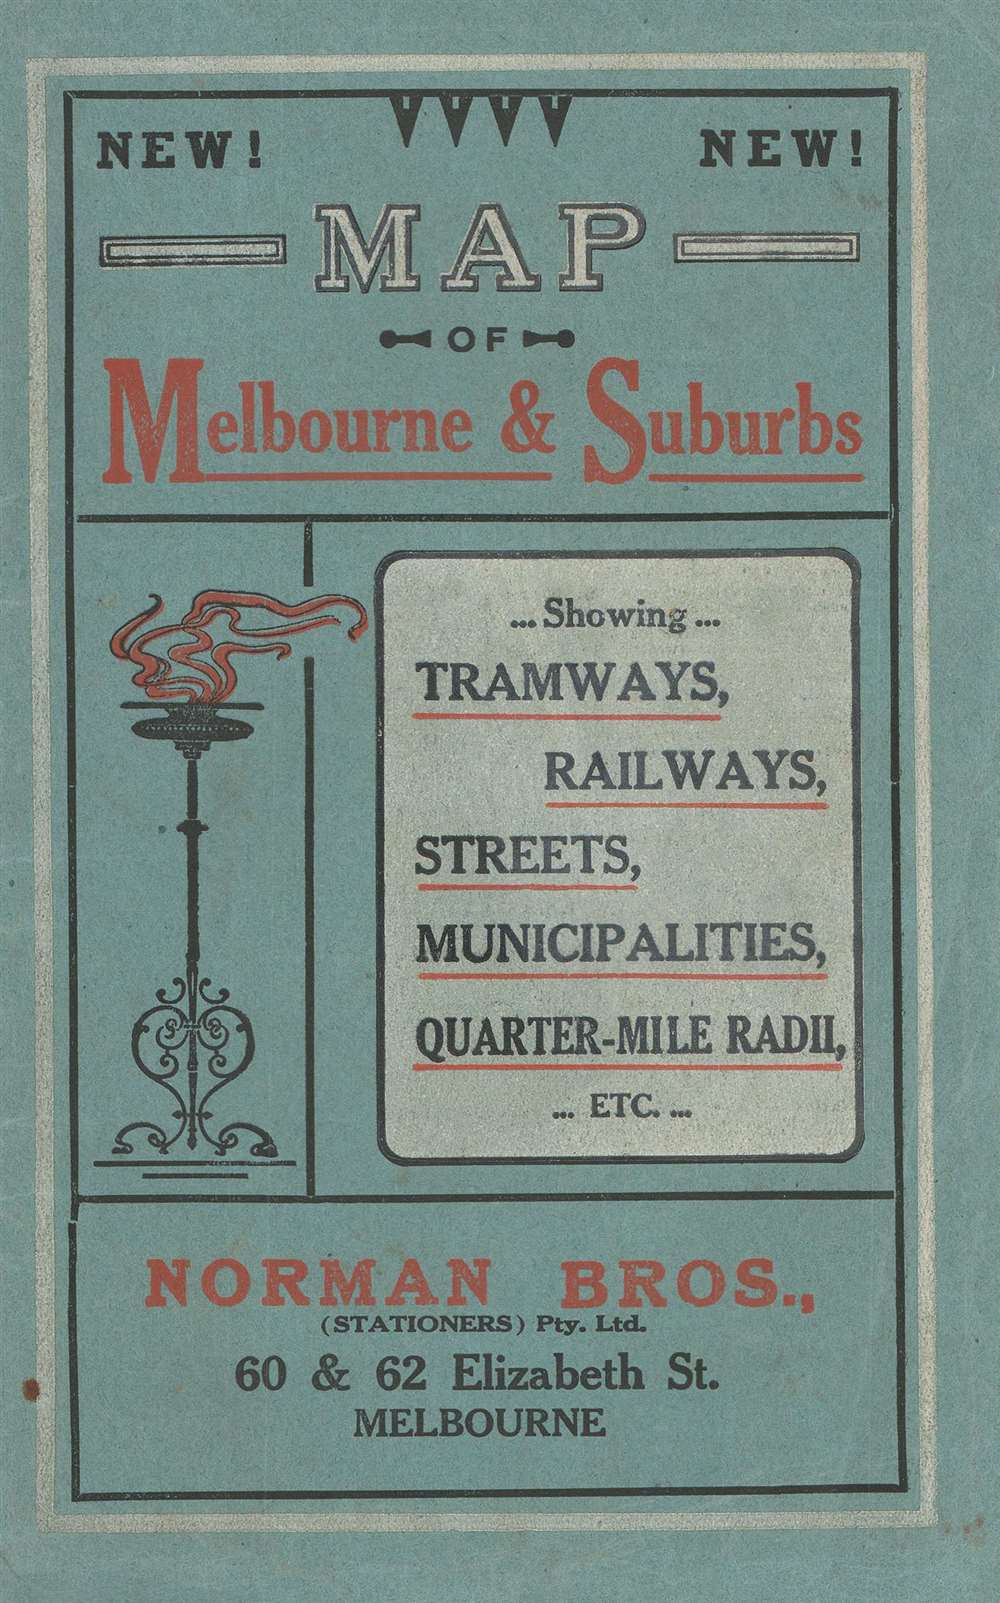 Norman Bros. New Map of Melbourne and Suburbs. - Alternate View 2